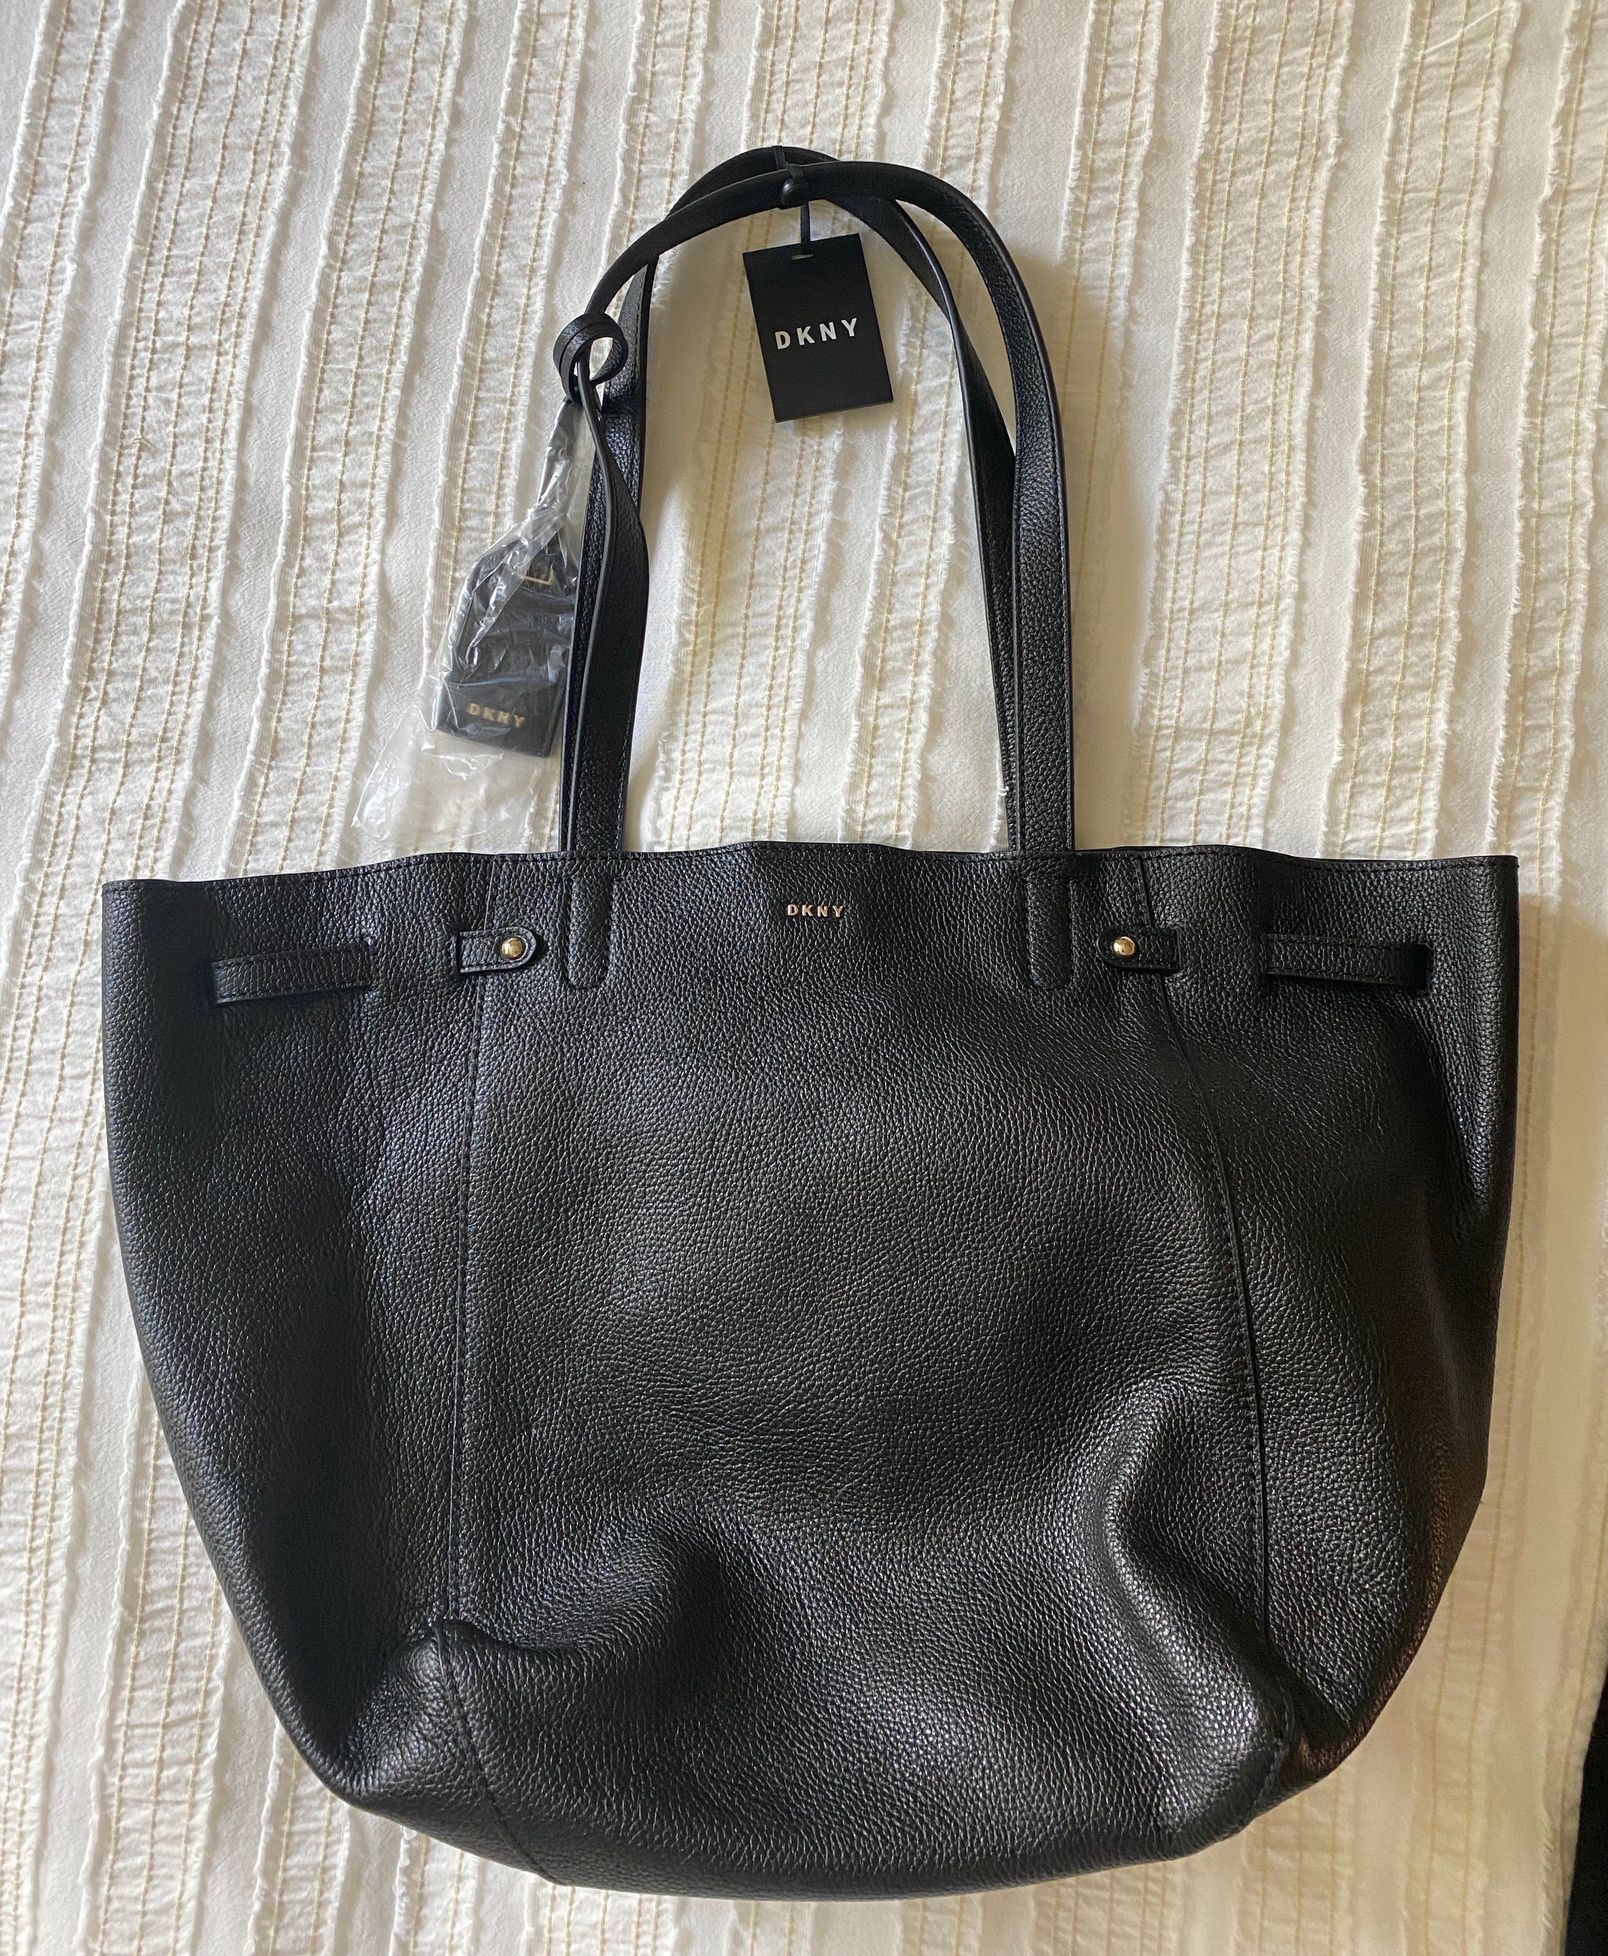 New With Tags DKNY Black Leather Large Tote